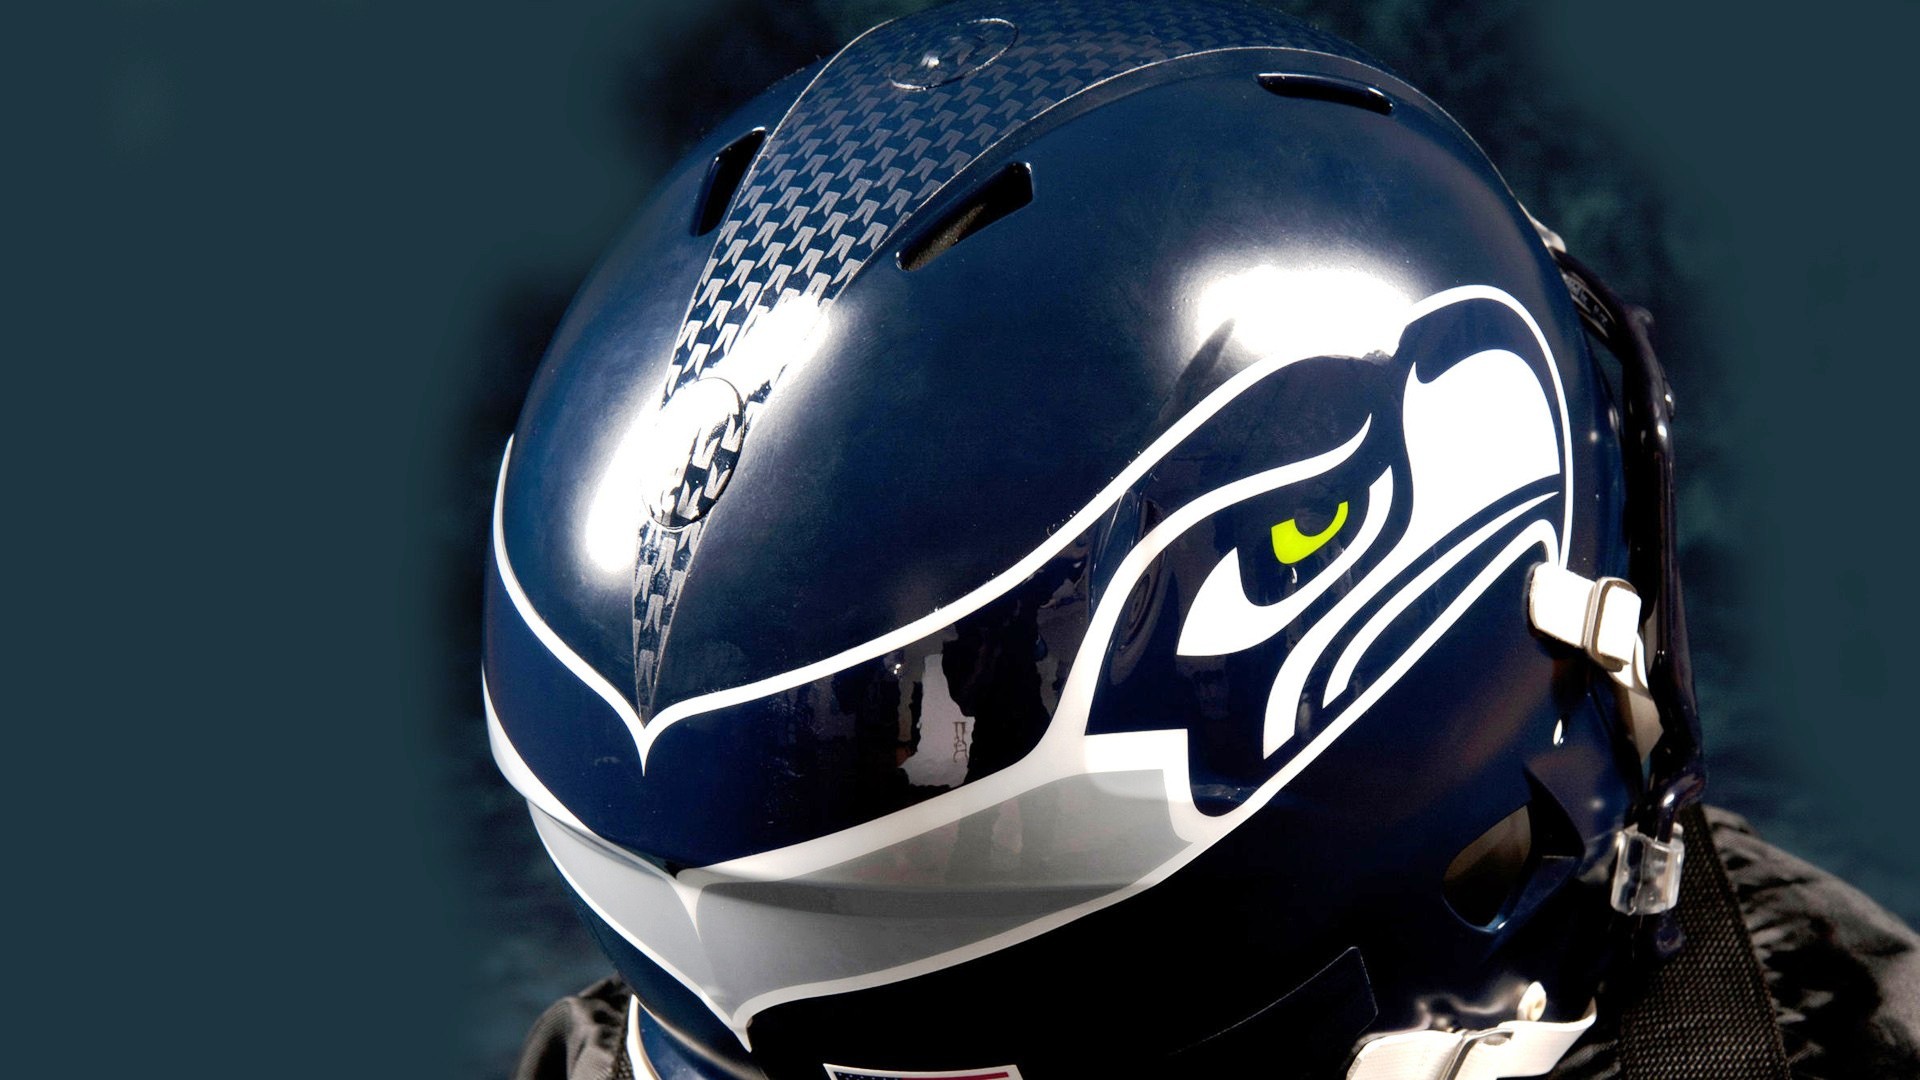 Desktop Wallpapers Seattle Seahawks with high-resolution 1920x1080 pixel. Download and set as wallpaper for Desktop Computer, Apple iPhone X, XS Max, XR, 8, 7, 6, SE, iPad, Android